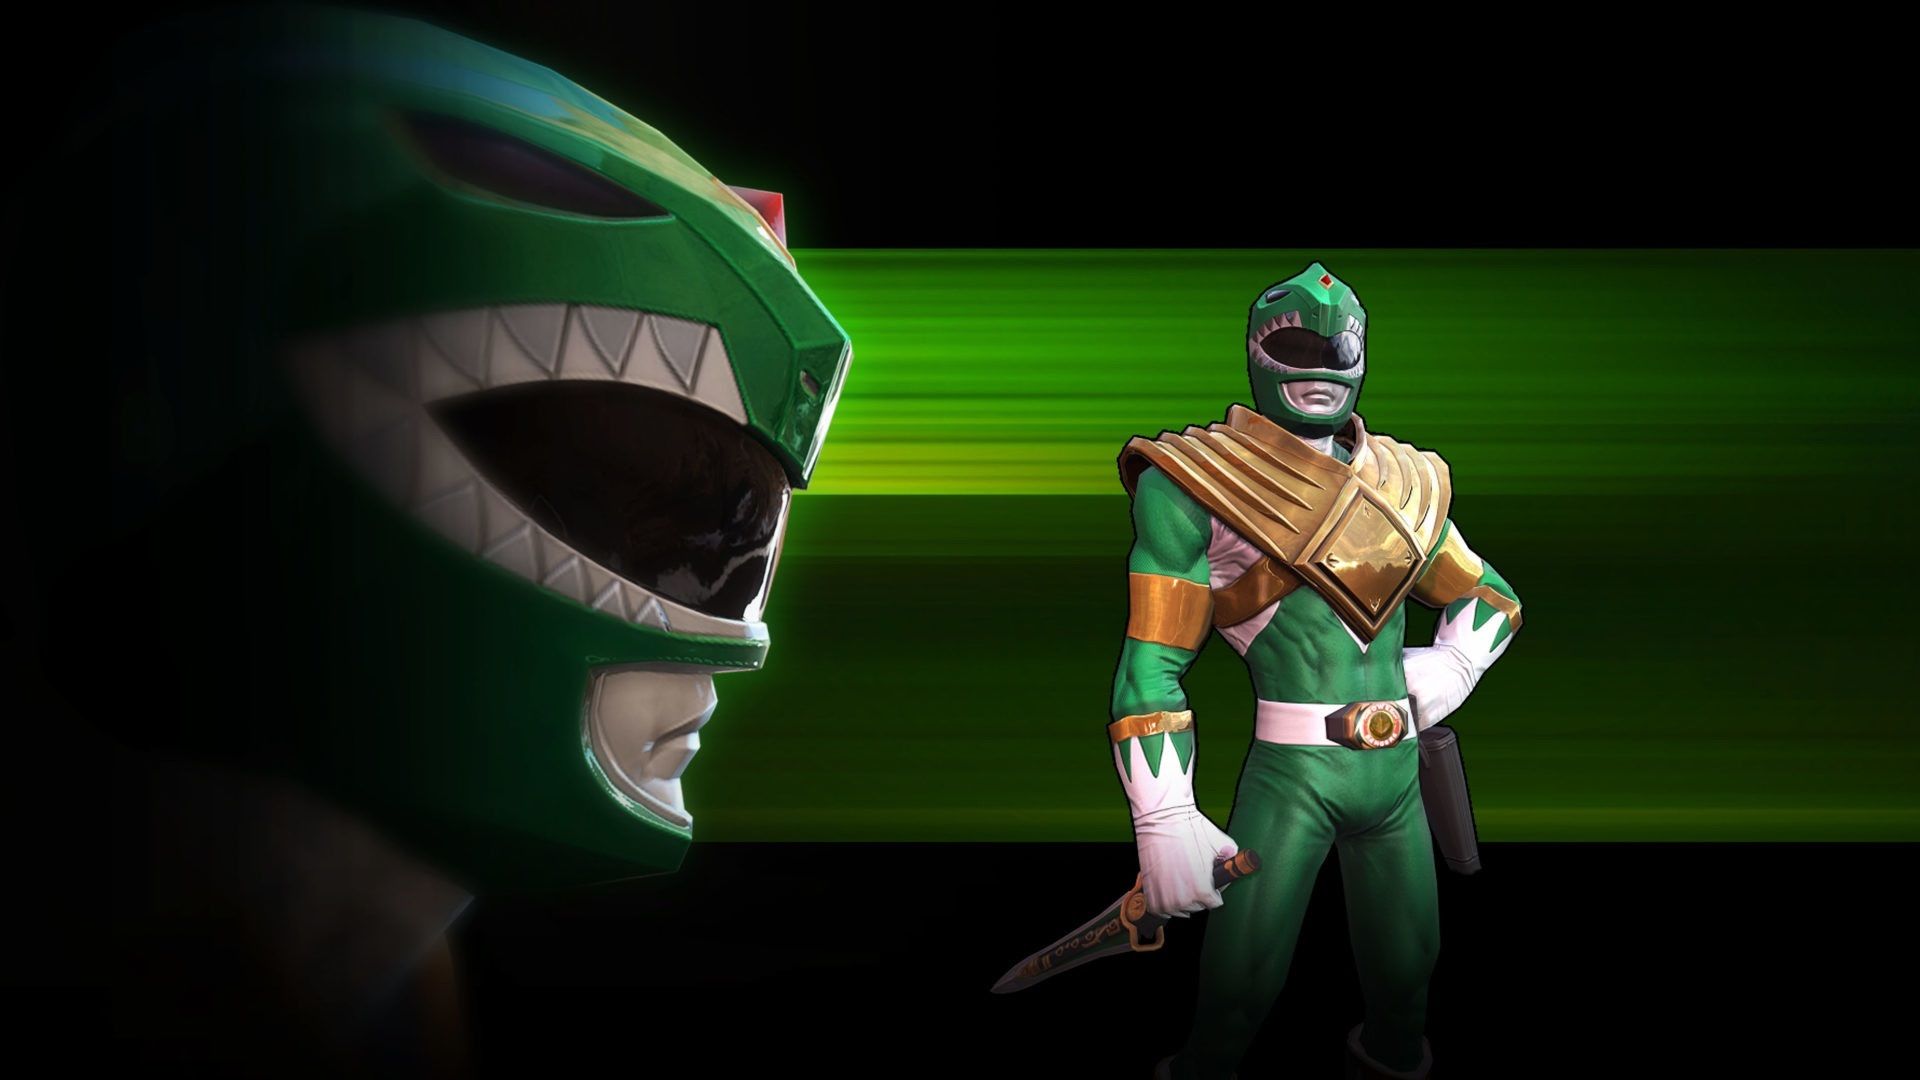 Wallpaper Power Rangers: Legacy Wars, armor, game 1920x1080 Full HD 2K Picture, Image